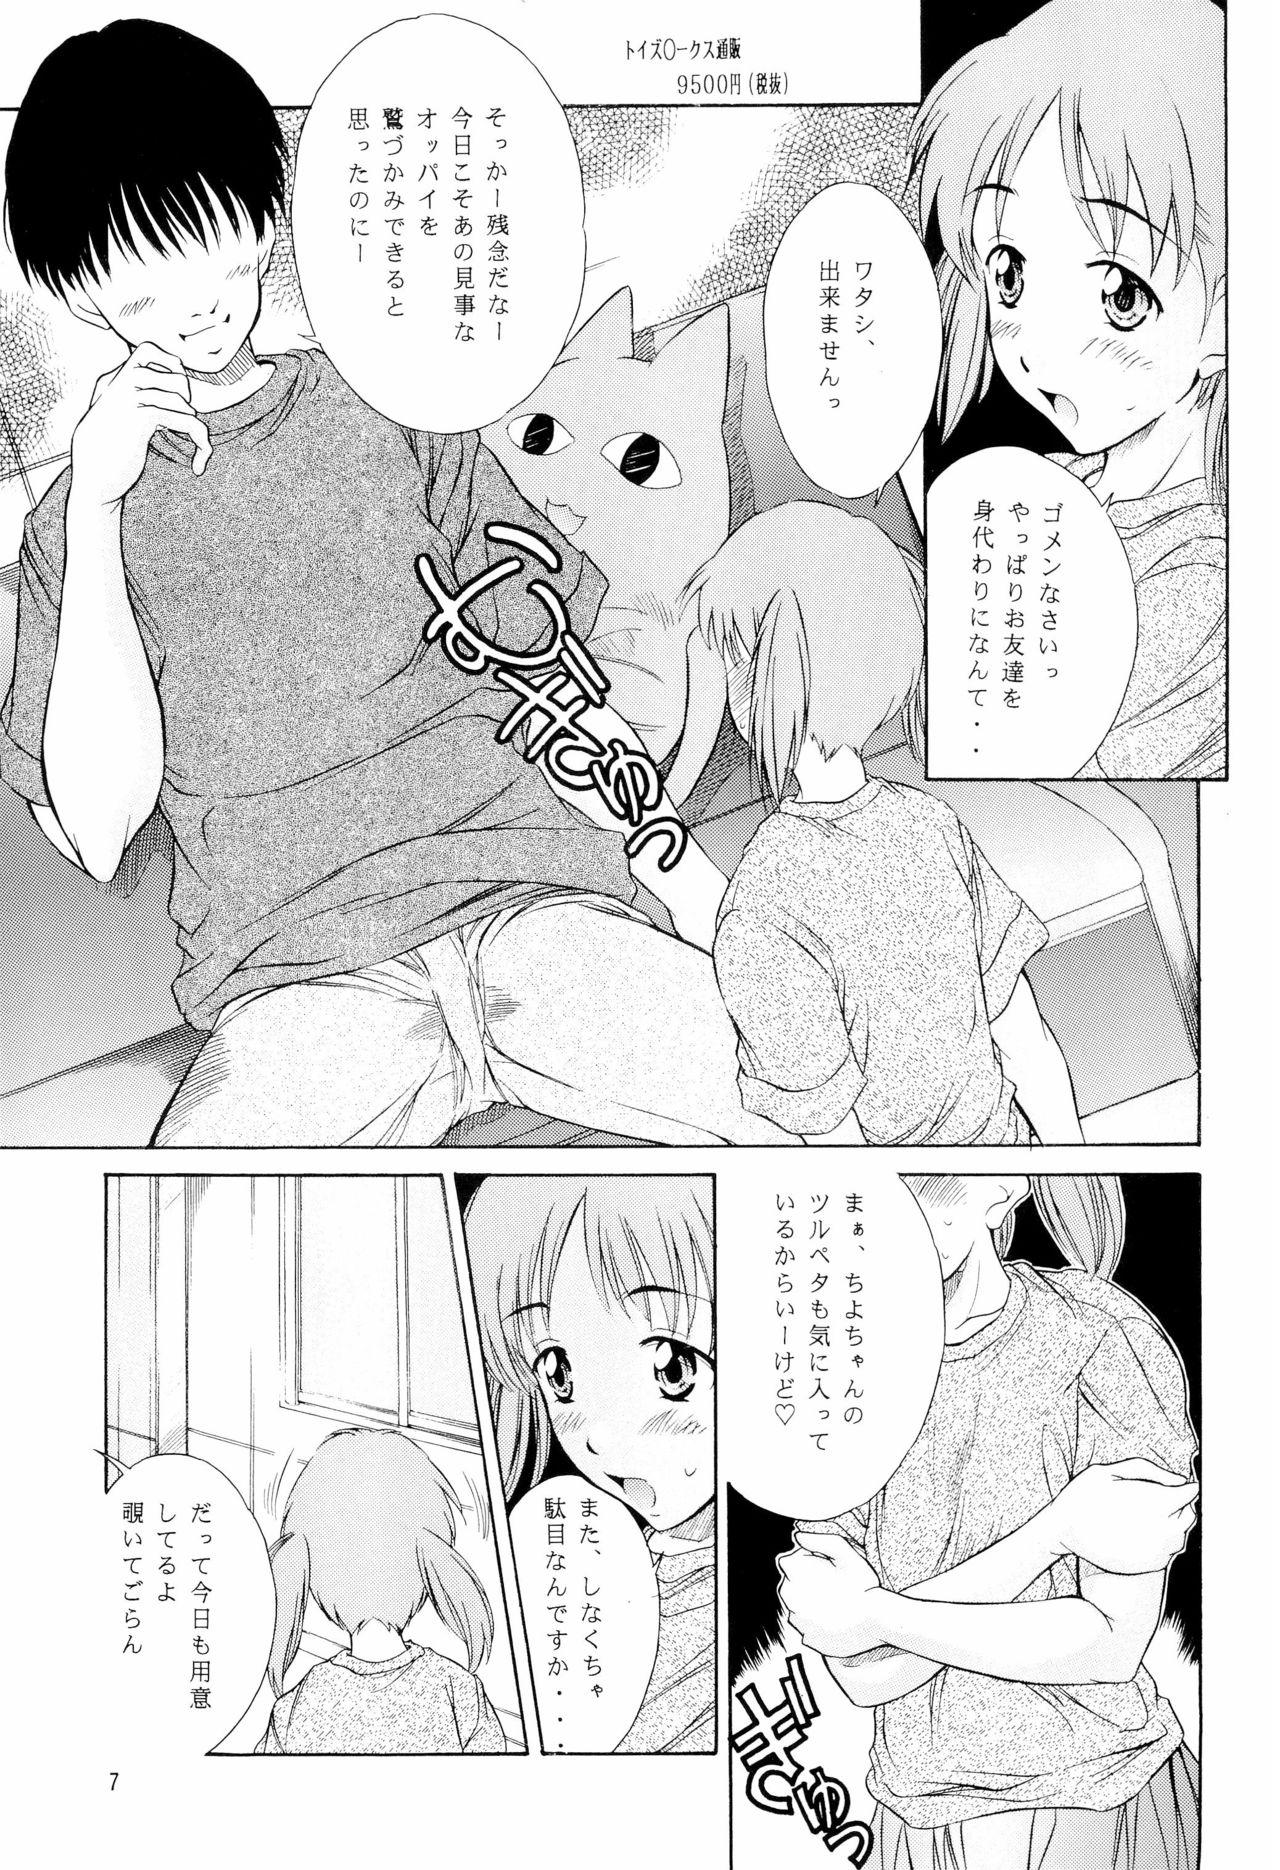 Brunettes Heisei Nymph Lover 14 - Azumanga daioh Muscle - Page 7